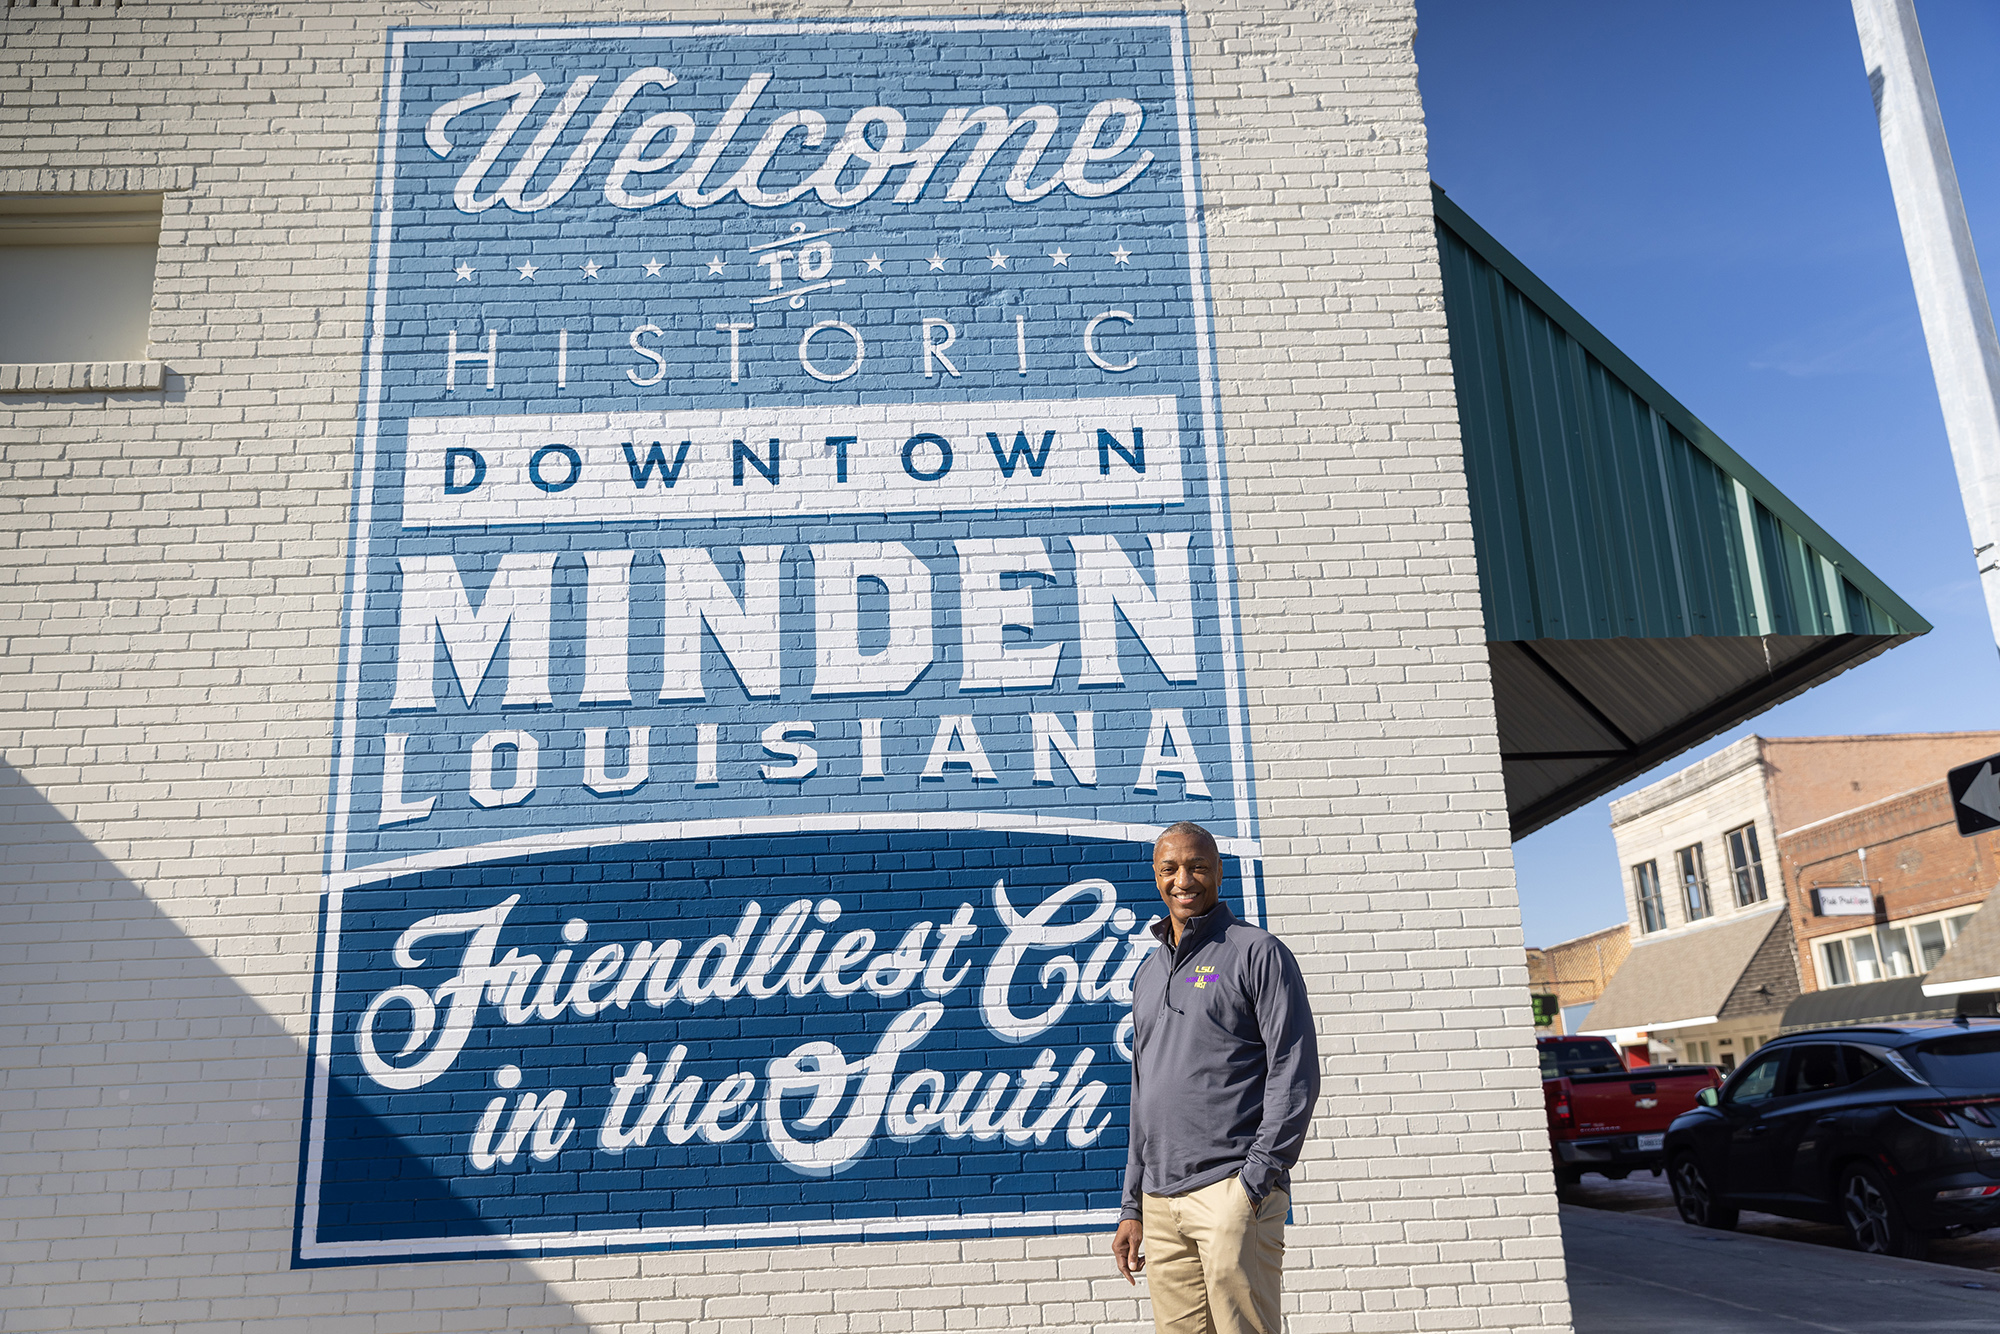 President Tate with Minden welcome sign